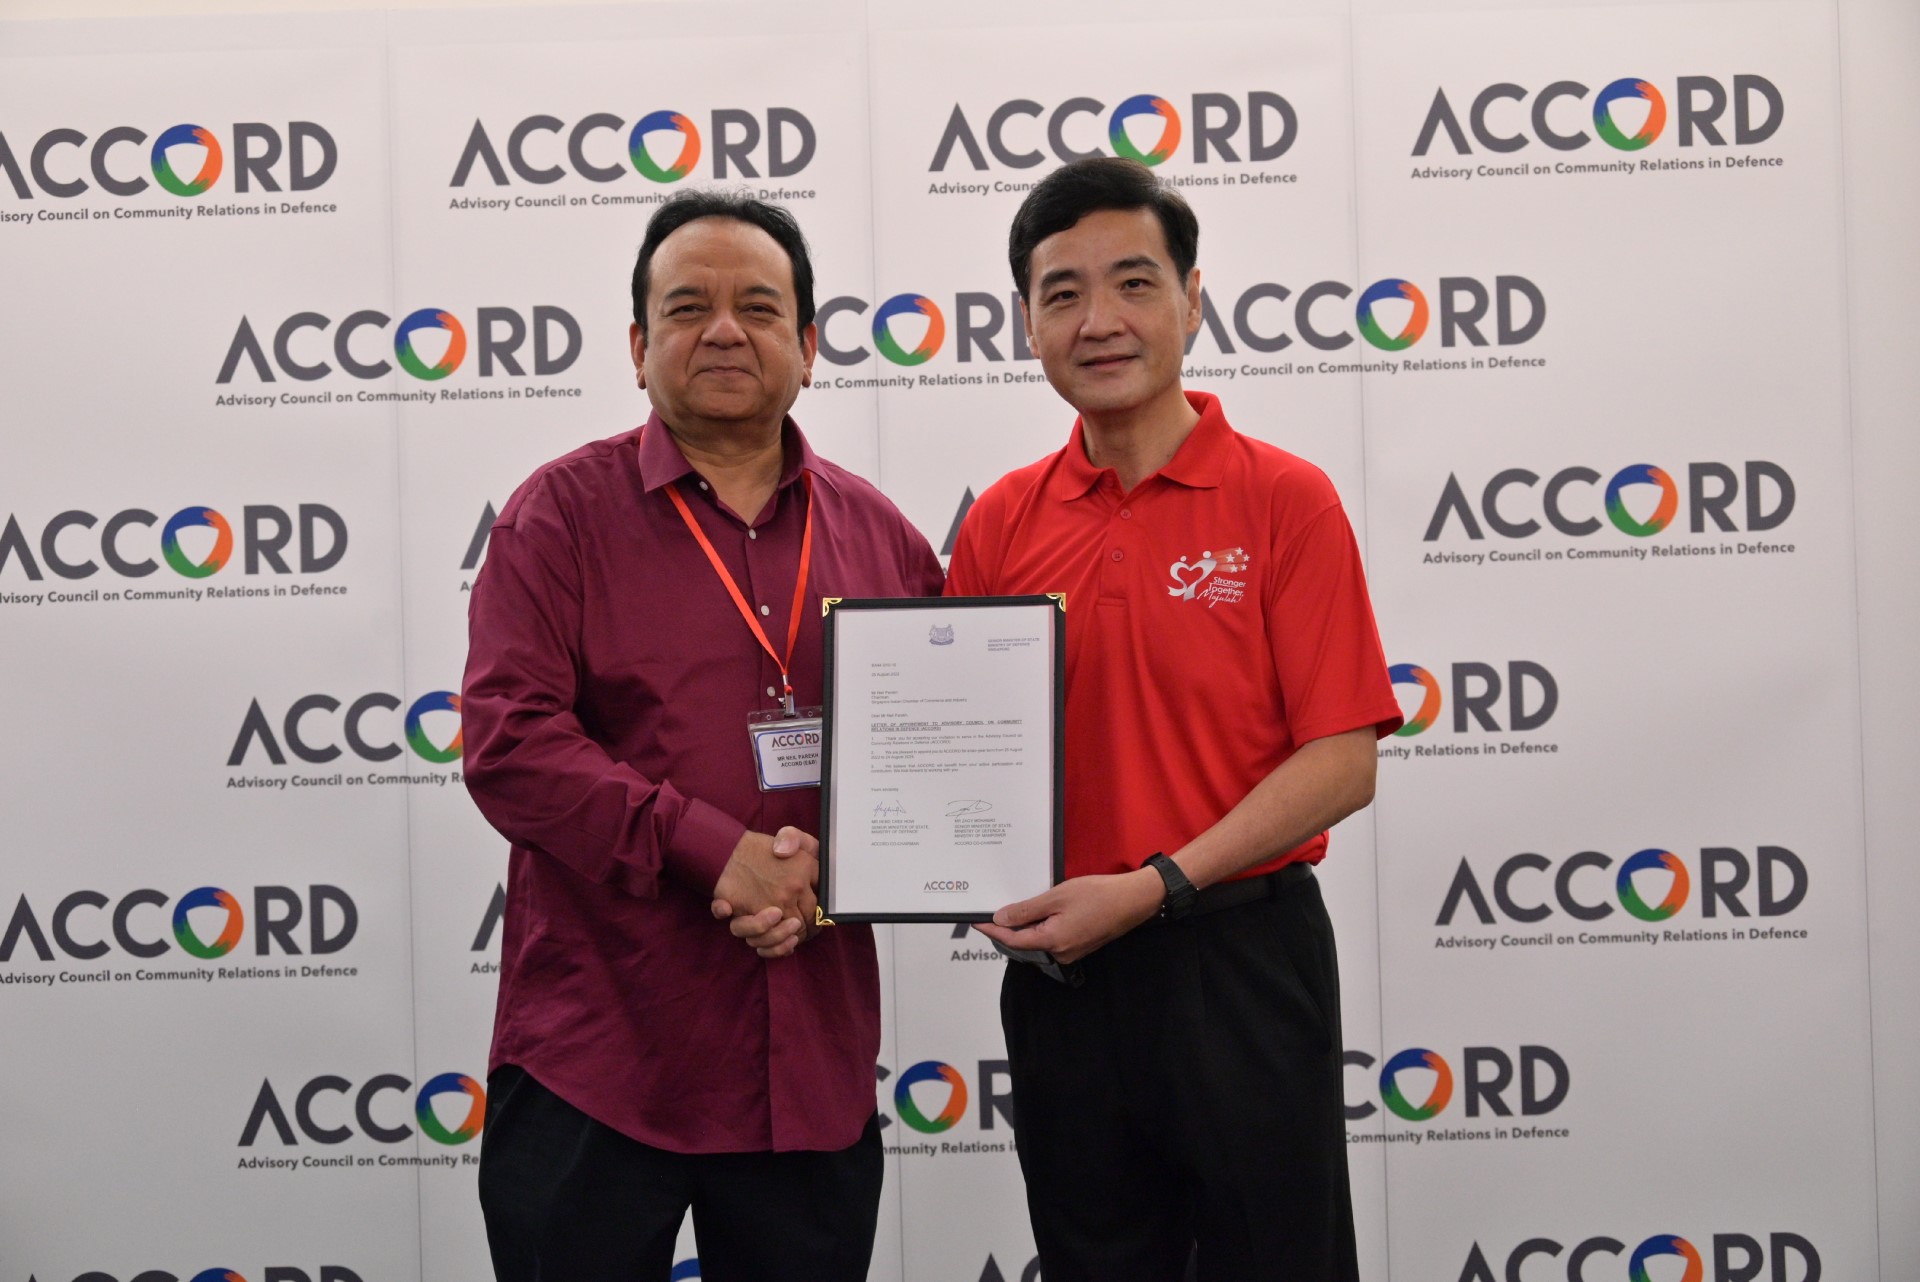 Mr Heng presenting the appointment certificate to Mr Neil Parekh, Chairman of Singapore Indian Chamber of Commerce and Industry, who will be joining the ACCORD Employer and Business Council for a second time. 